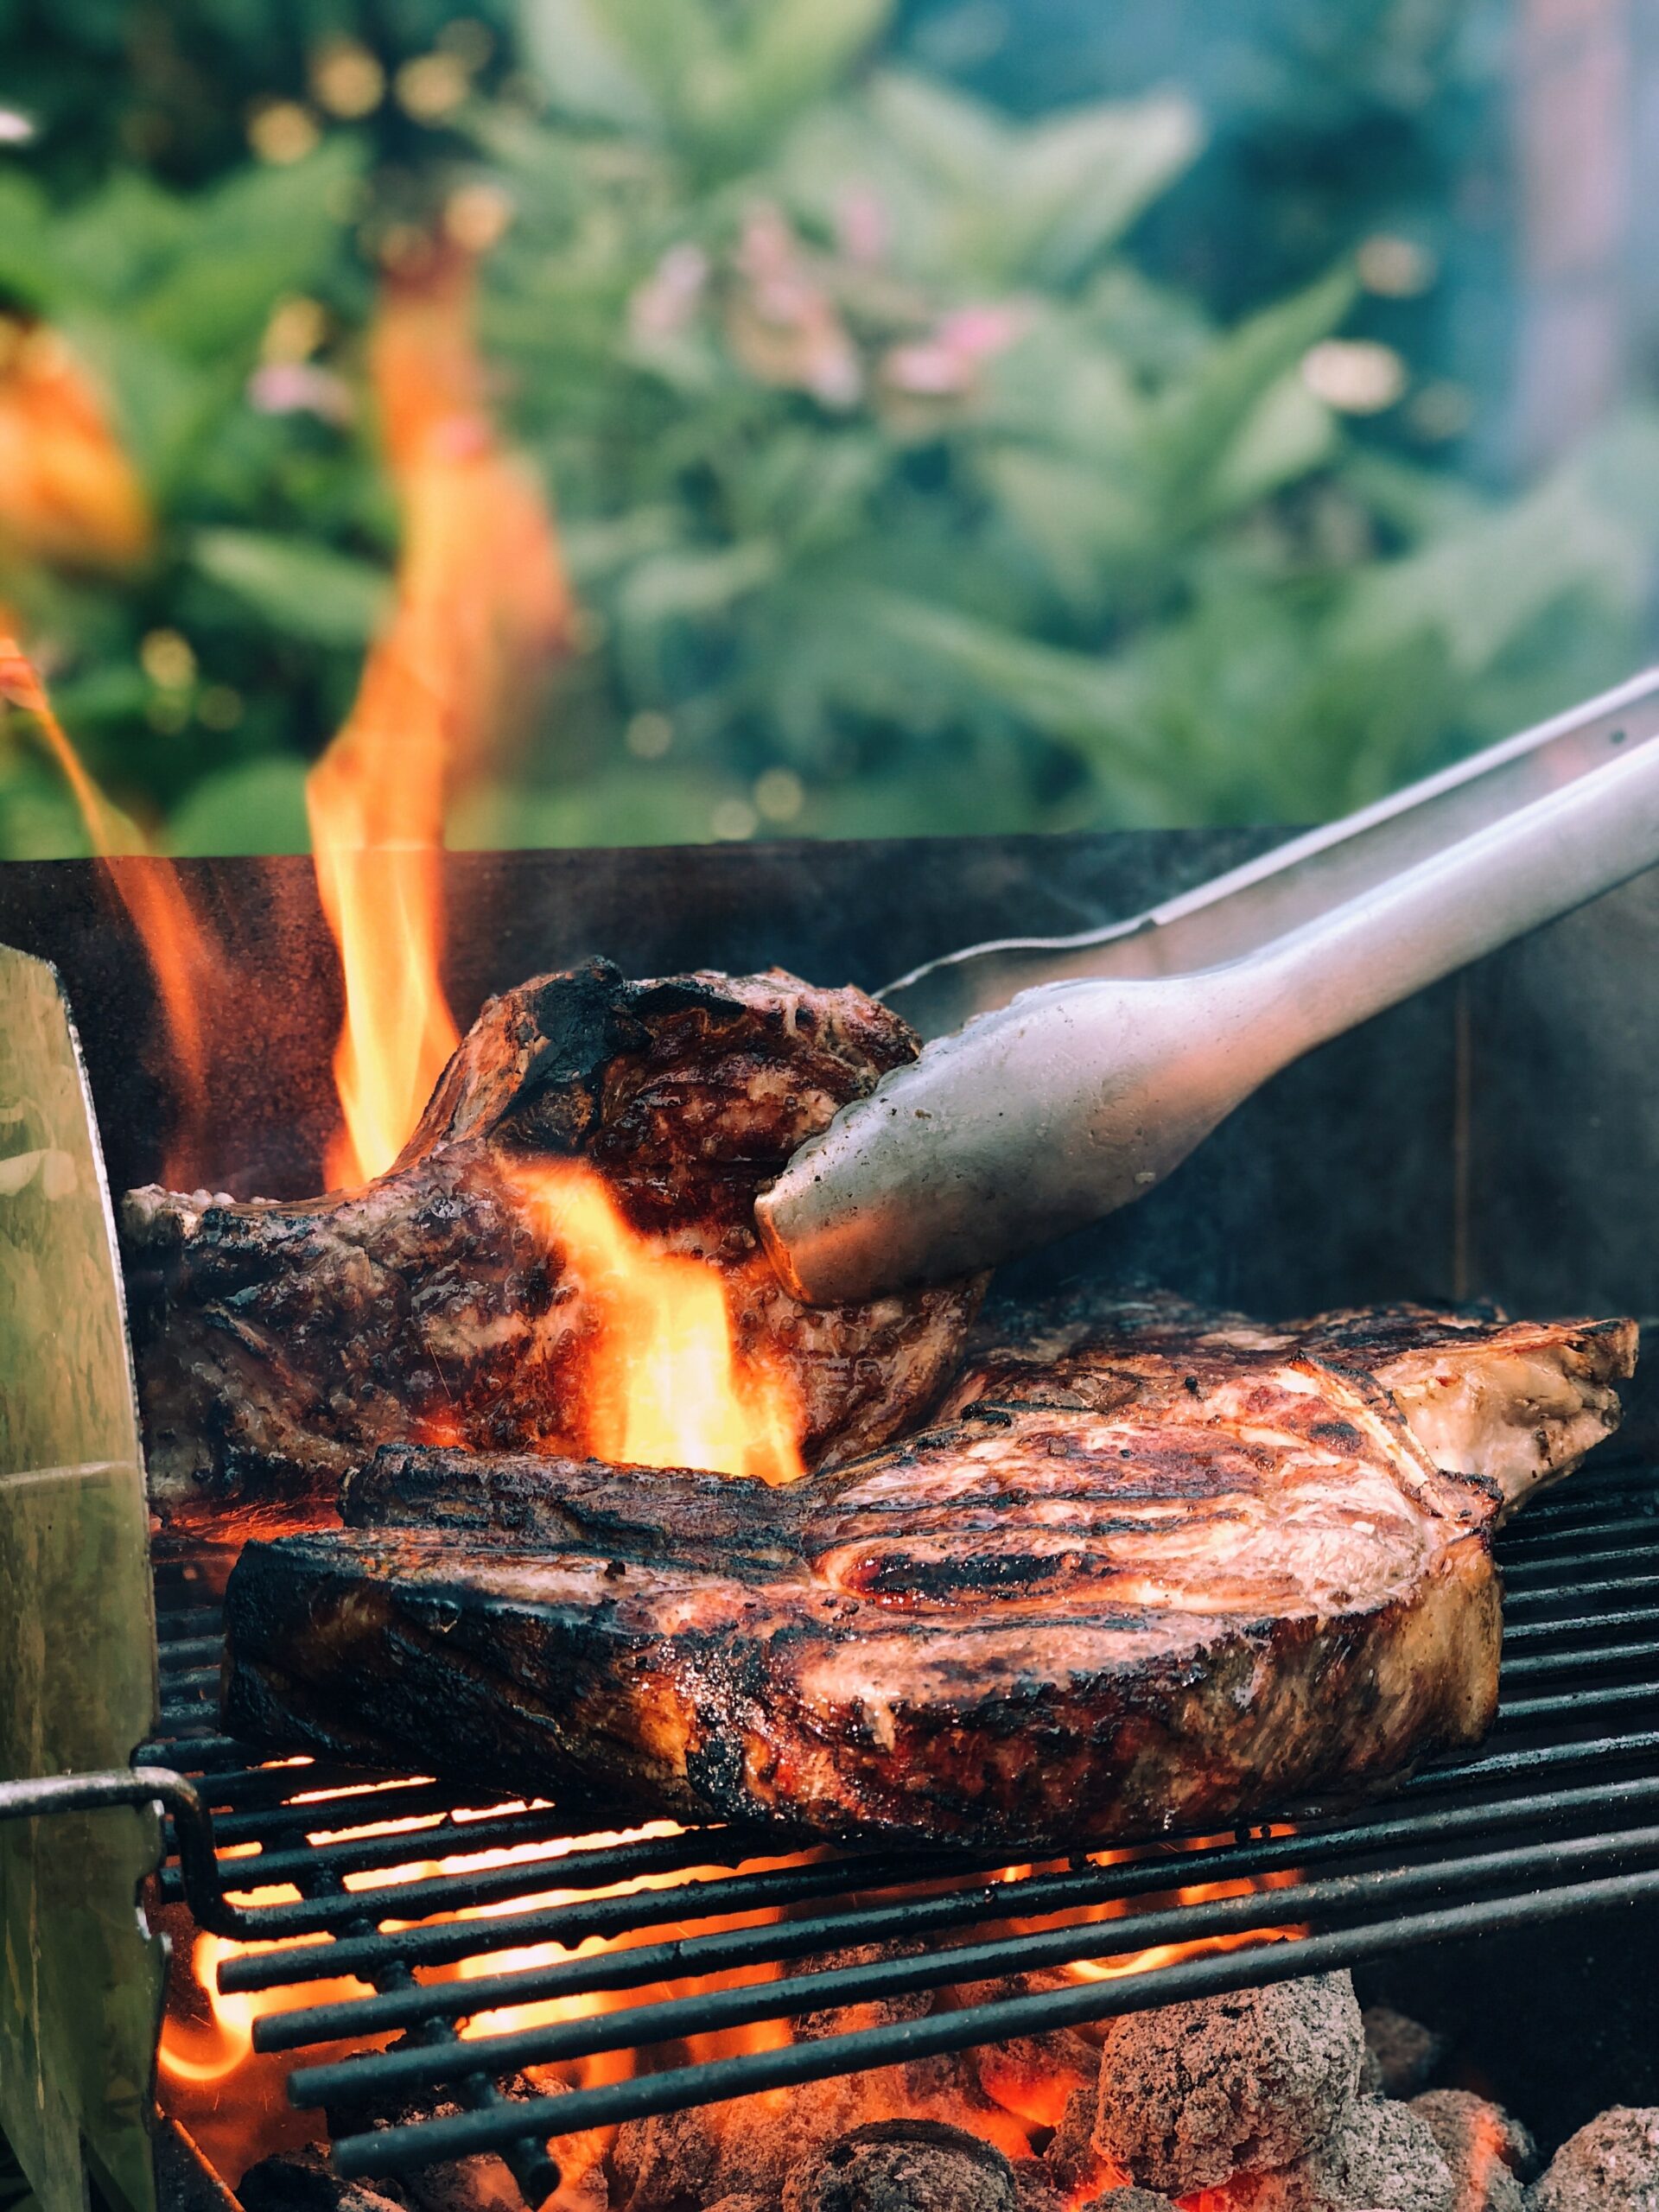 Public affairs: Grilling safety for Labor Day by Mattison Holland